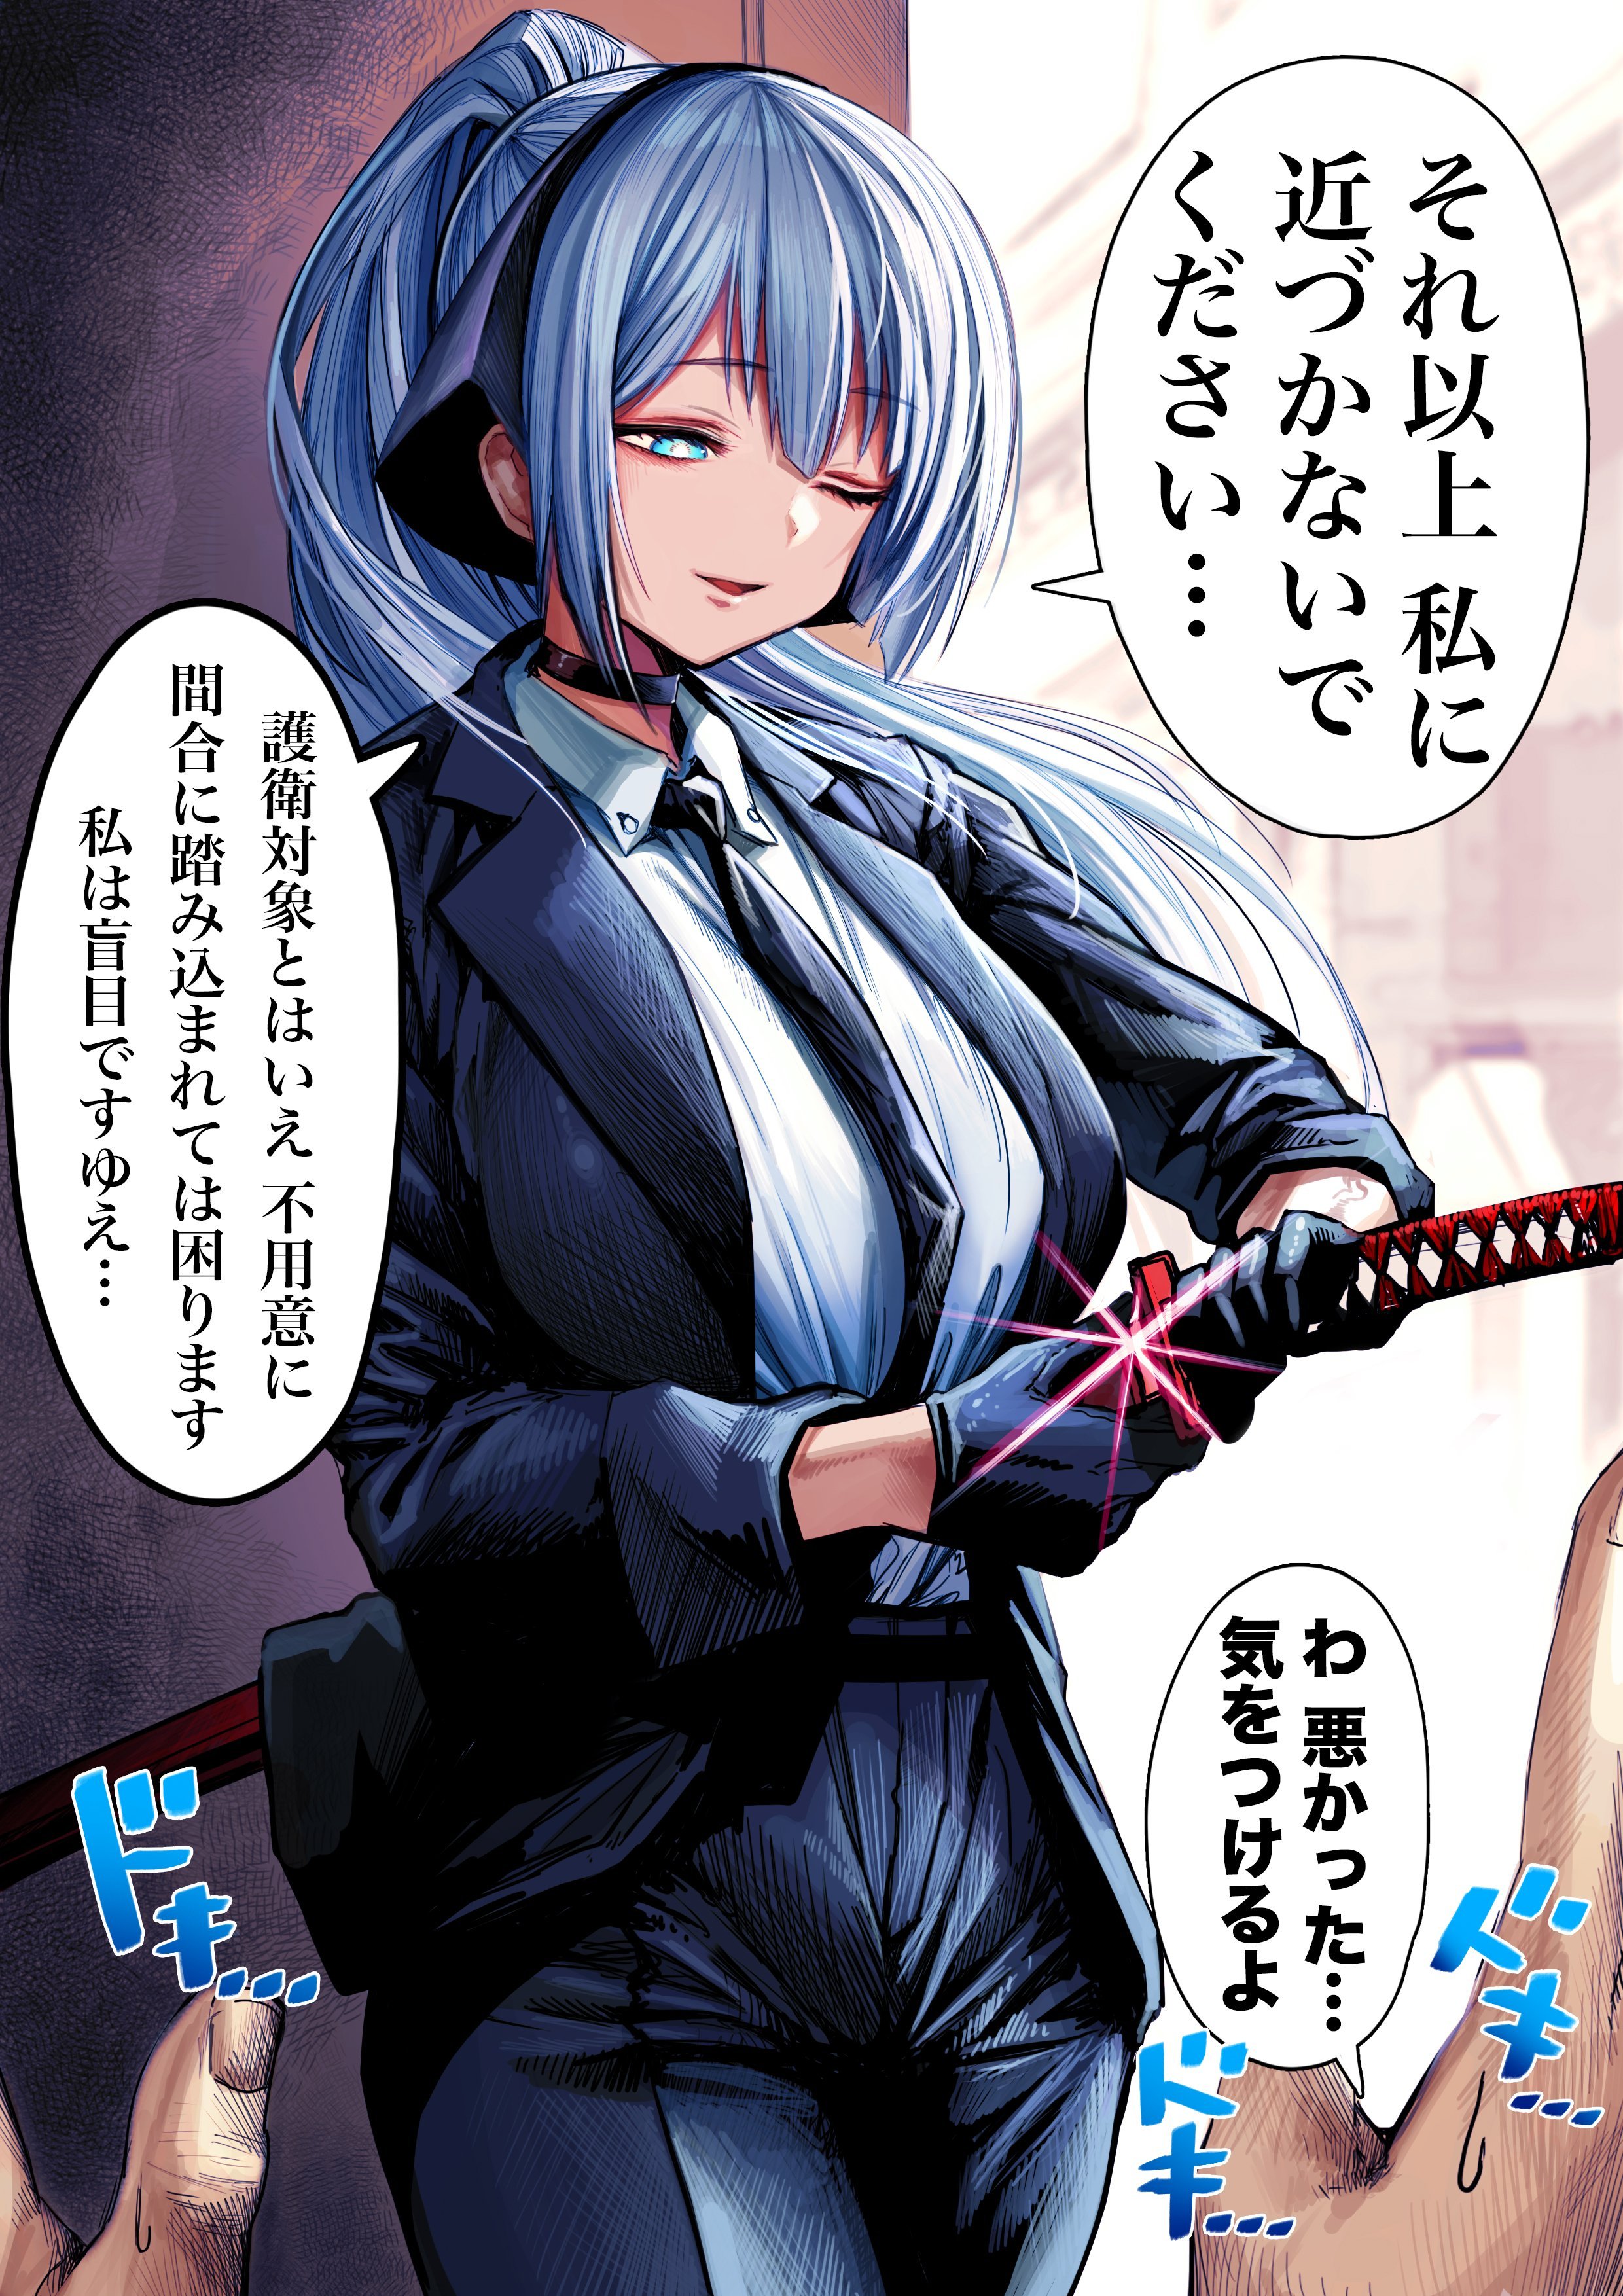 The Strike Range of a Blind Swordswoman with Her Escort Target (Official Colored)